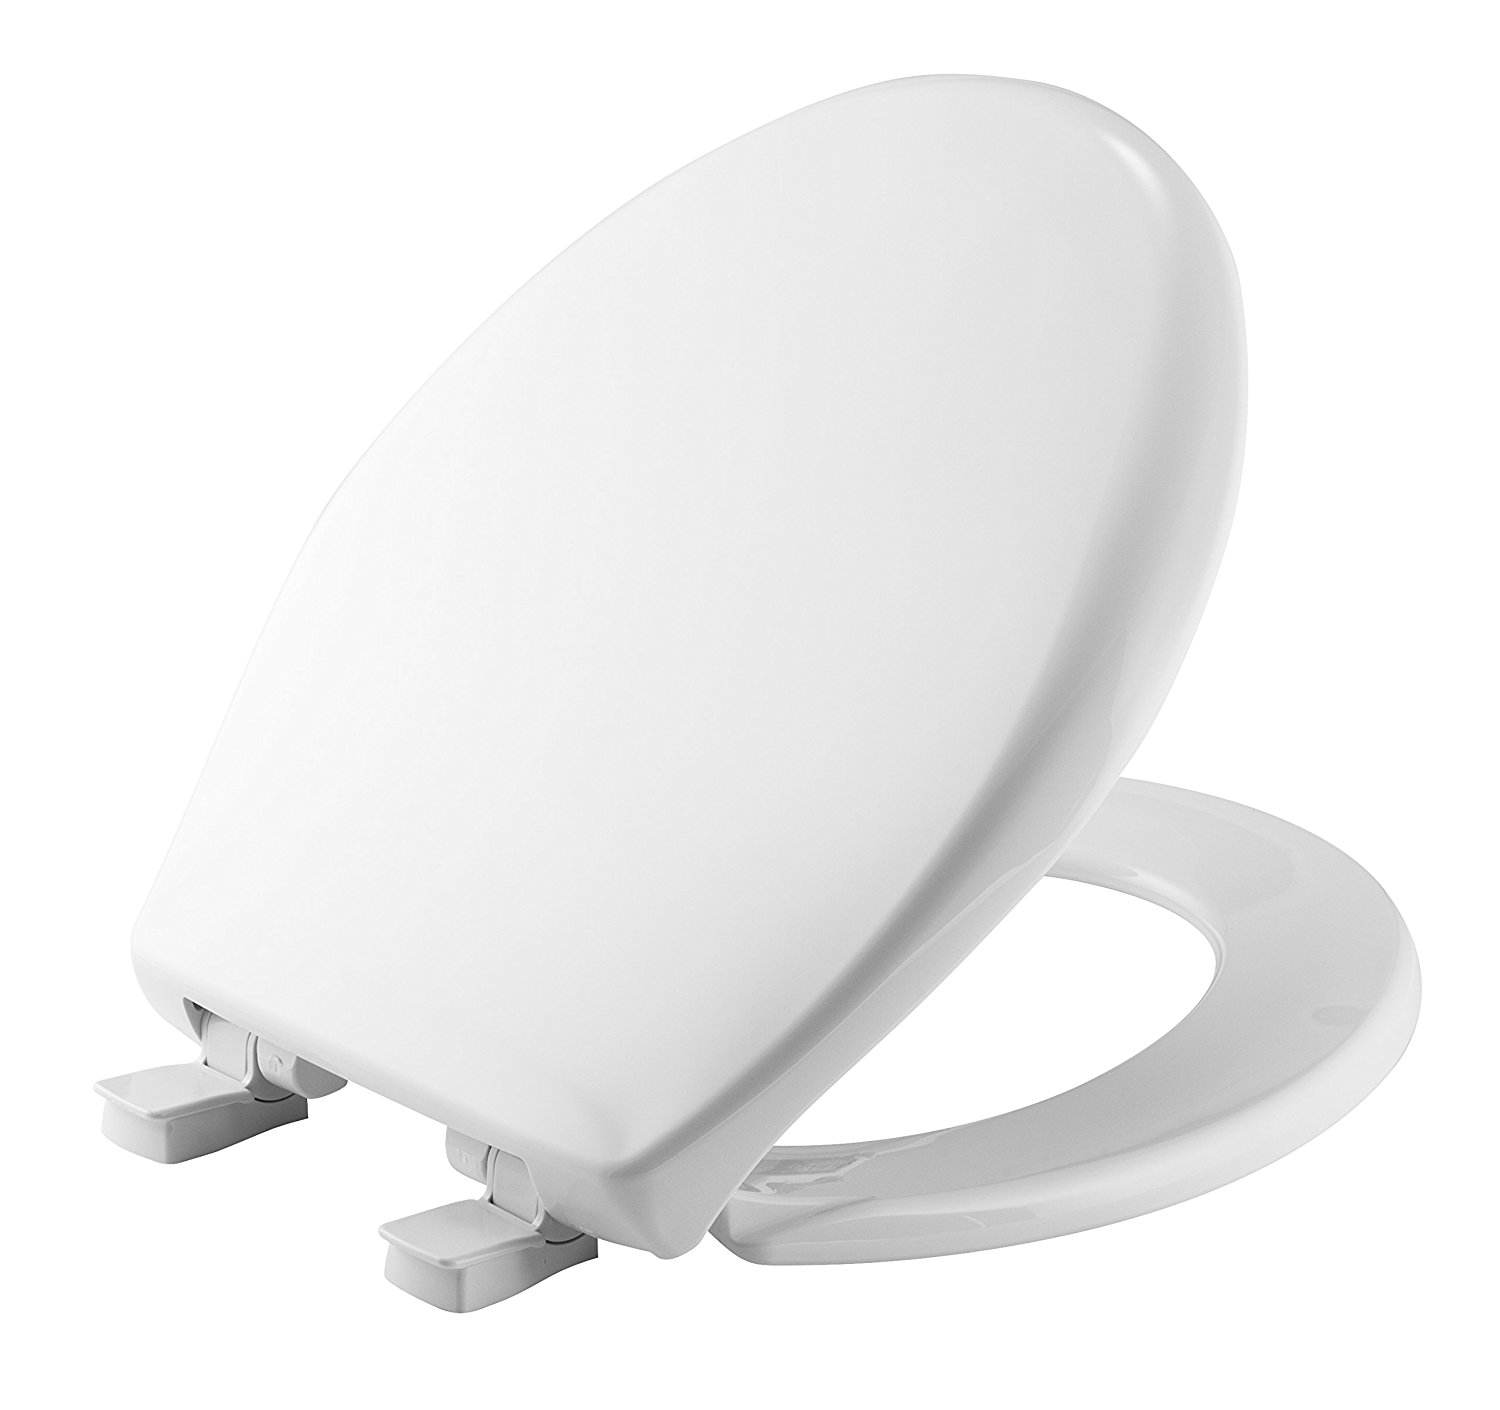 Mayfair 20SLOWE 000 Slow-Close Plastic Toilet Seat featuring Whisper-Close, Easy Clean & Change Hinges and STA-TITE Seat Fastening System, Round, White